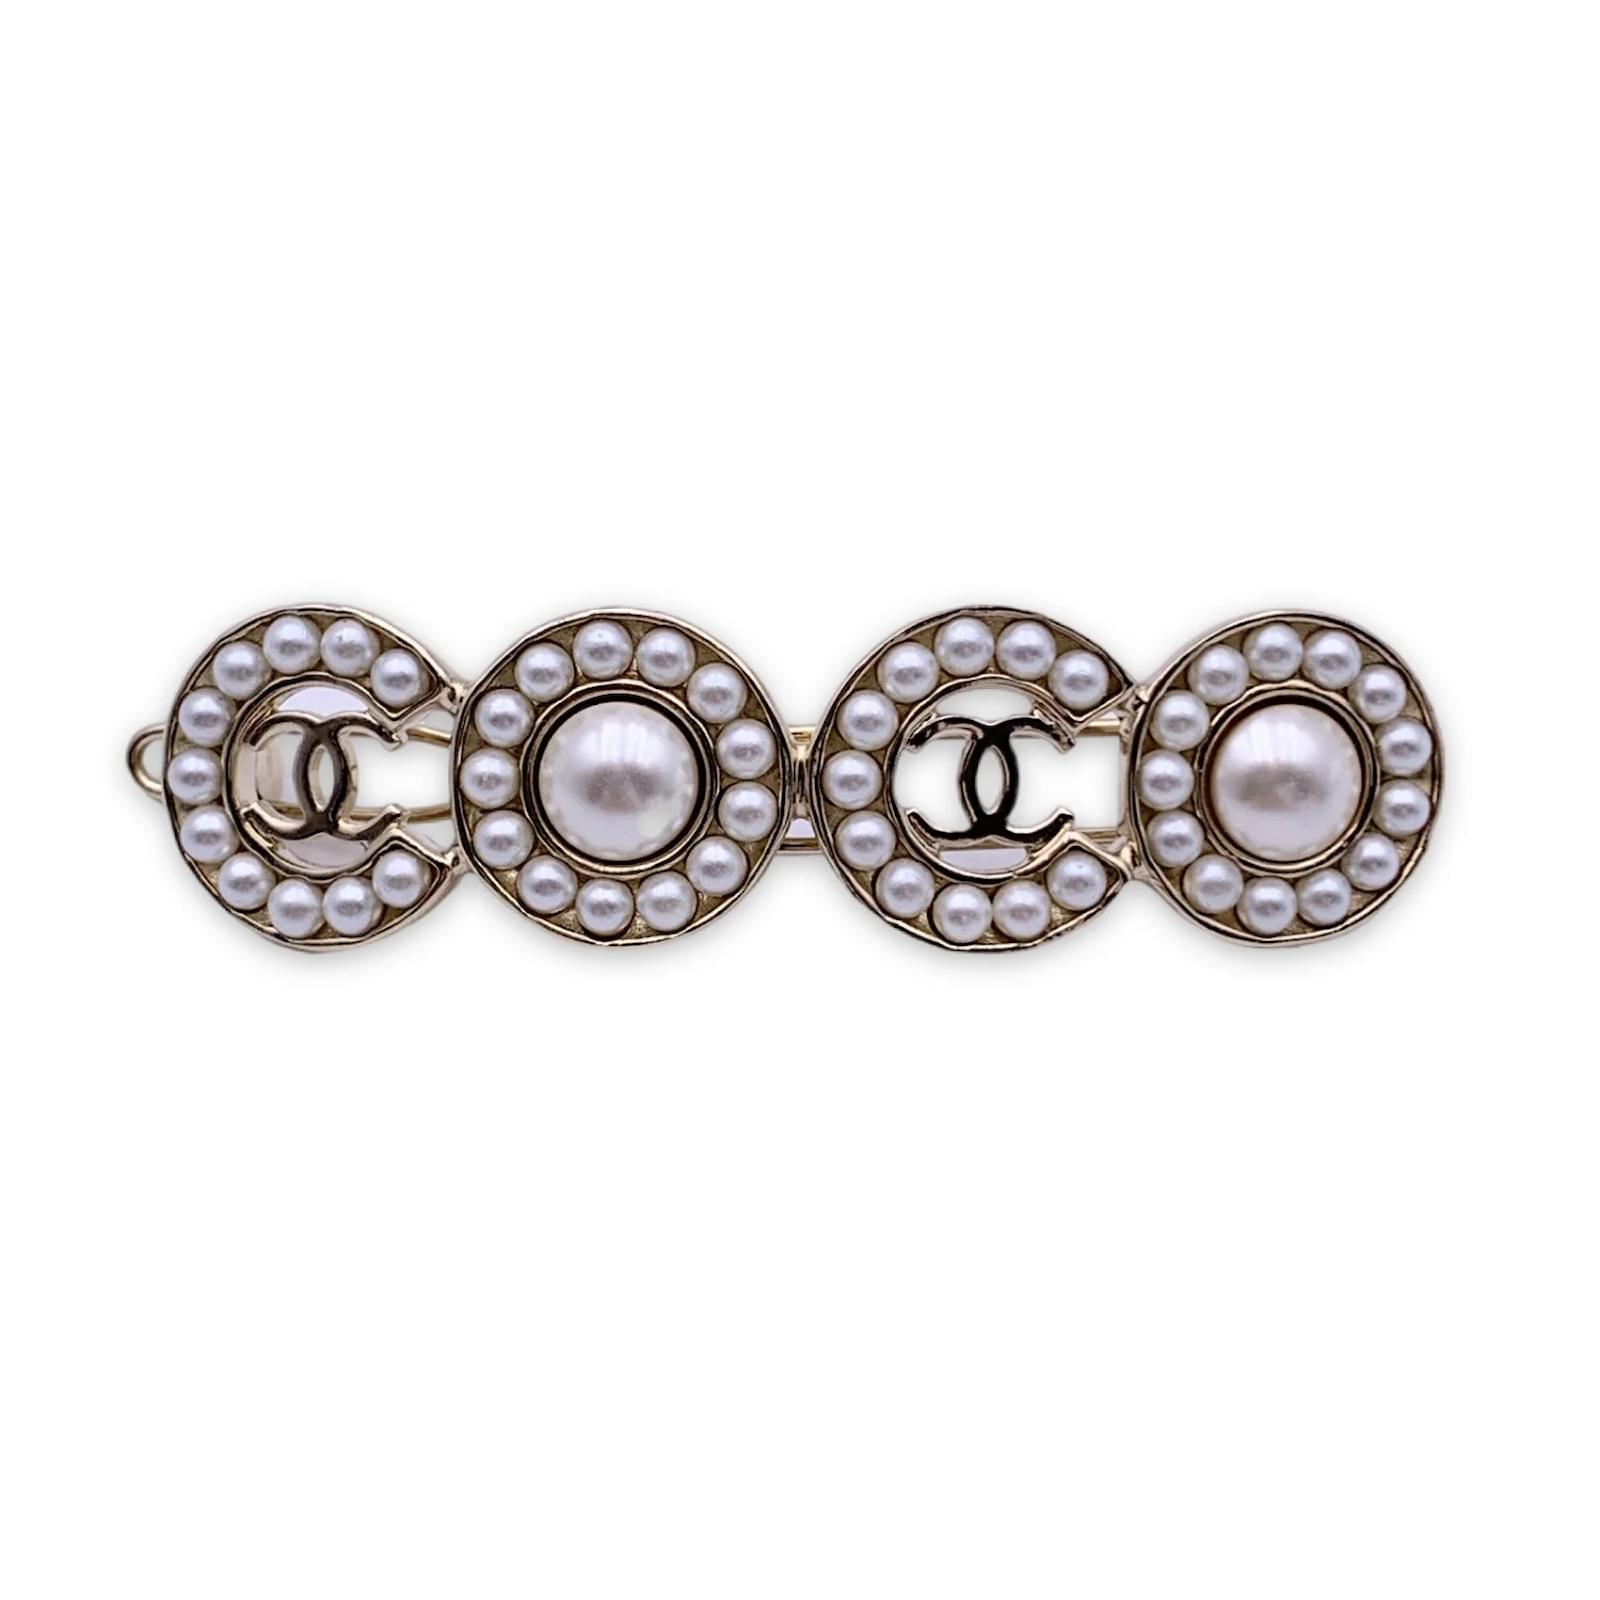 Light Gold Metal and Pearls Coco Hair Clip Barrette